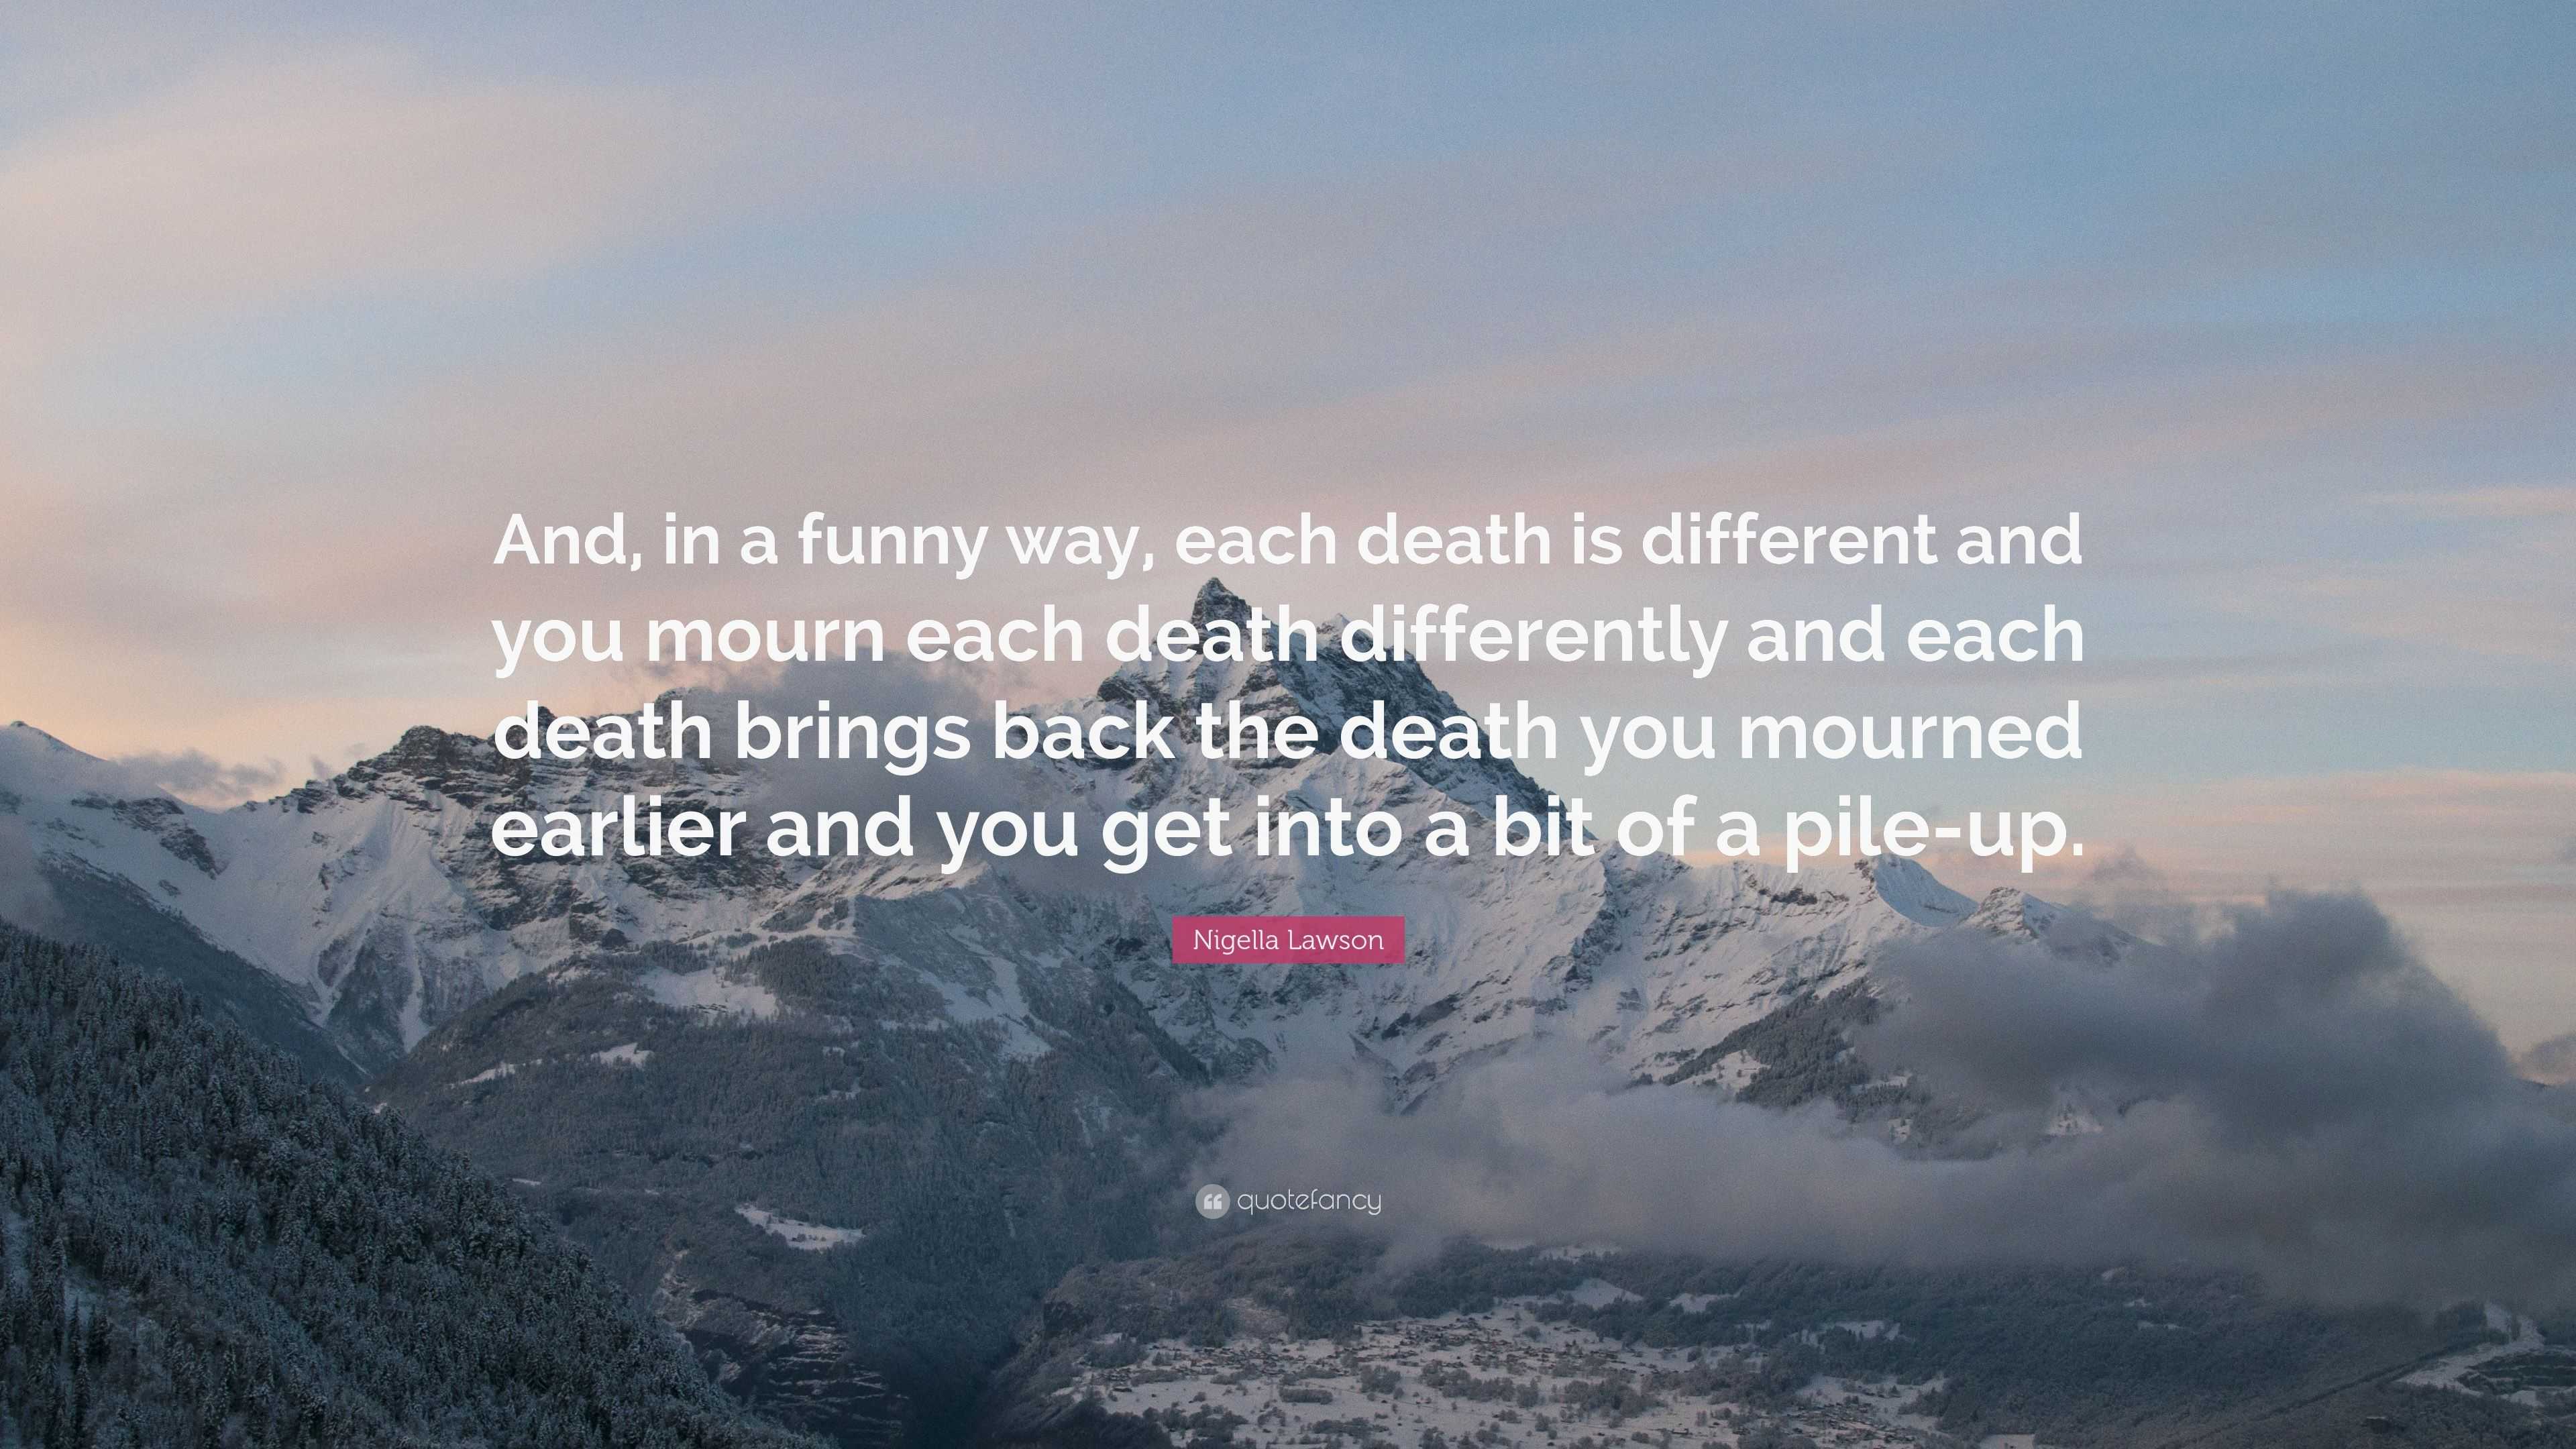 Nigella Lawson Quote: “And, in a funny way, each death is different and ...